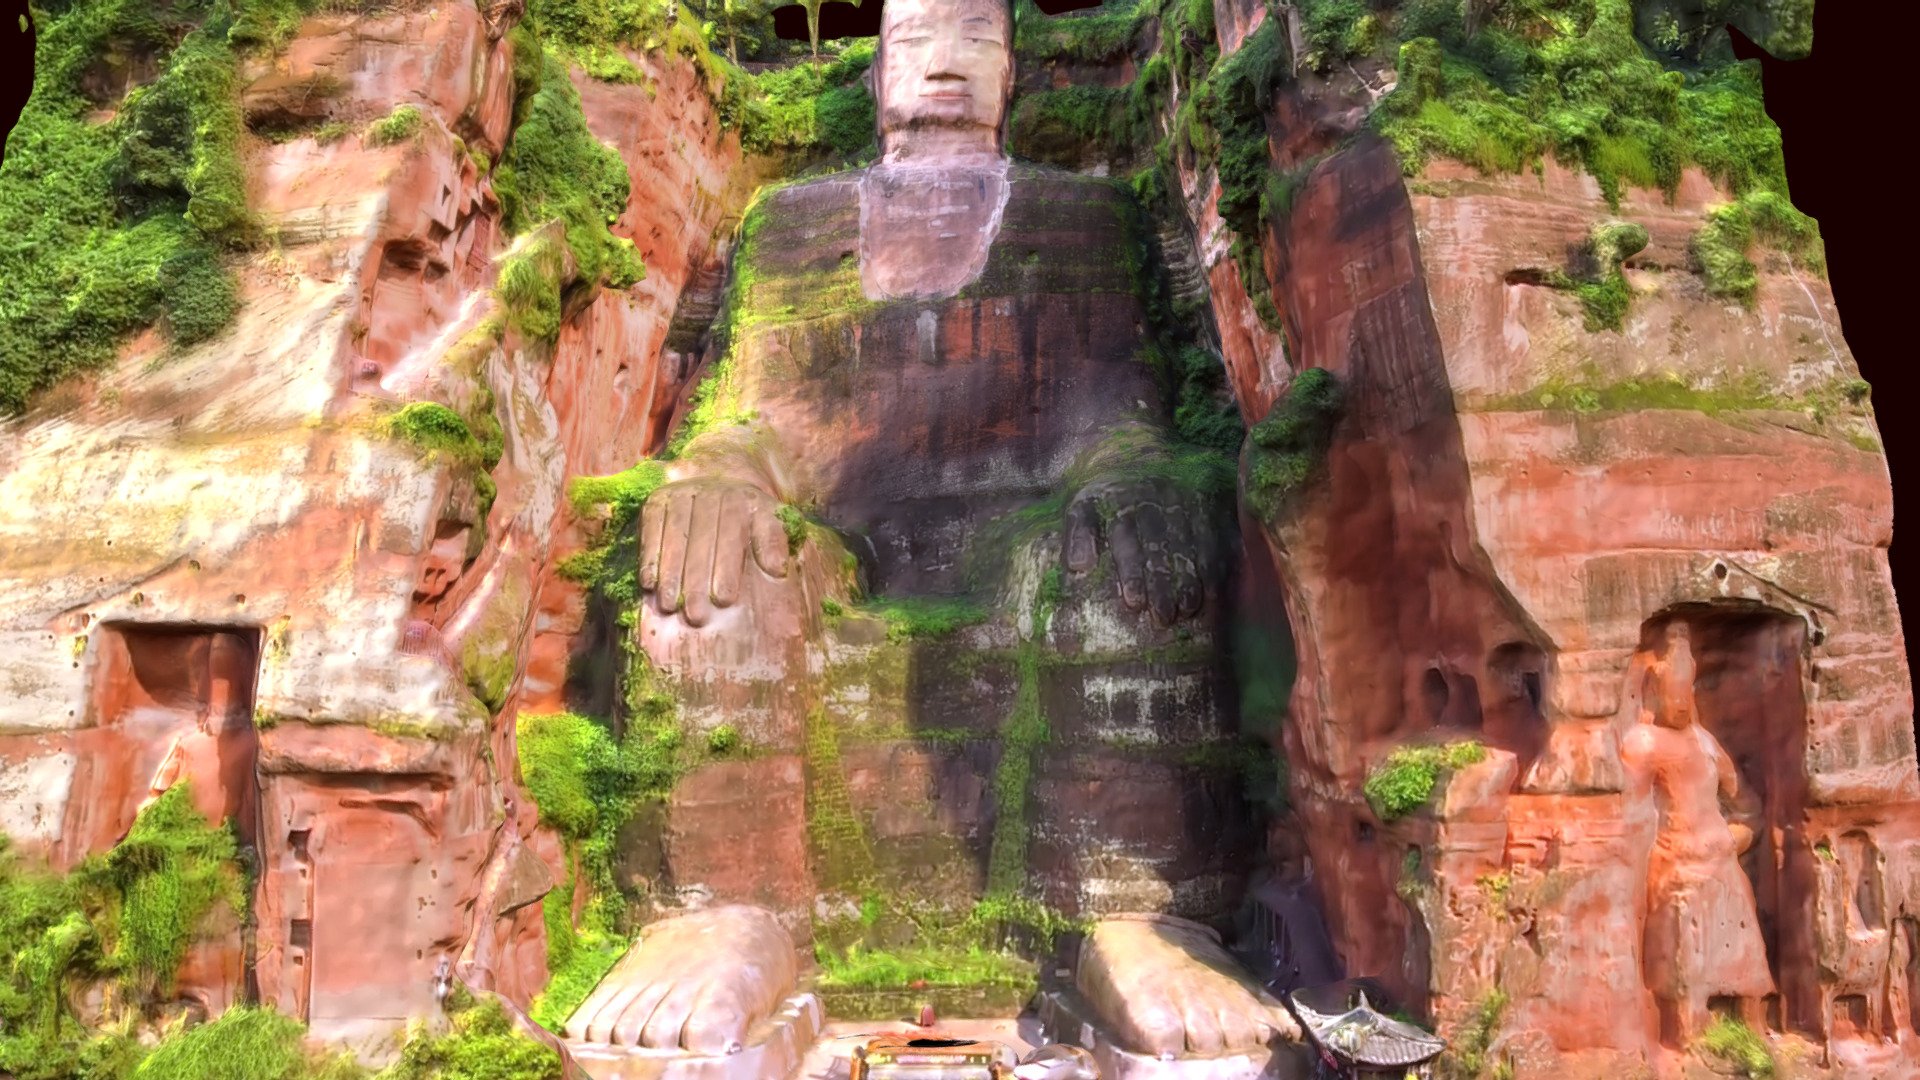 The Leshan Giant Buddha is a 71 metre tall stone statue, built between 713 and 803 (during the Tang dynasty). It is carved out of a cliff face of Cretaceous red bed sandstones that lies at the confluence of the Min River and Dadu River in the southern part of Sichuan Province in China, near the city of Leshan. The stone sculpture faces Mount Emei, with the rivers flowing below its feet. It is the largest and tallest stone Buddha statue in the world and it is by far the tallest pre-modern statue in the world. It is over 4-kilometre from the Wuyou Temple.

The Mount Emei Scenic Area, including Leshan Giant Buddha Scenic Area, has been listed as a UNESCO World Heritage Site since 1996.

Model made by photogrammetry 3d model